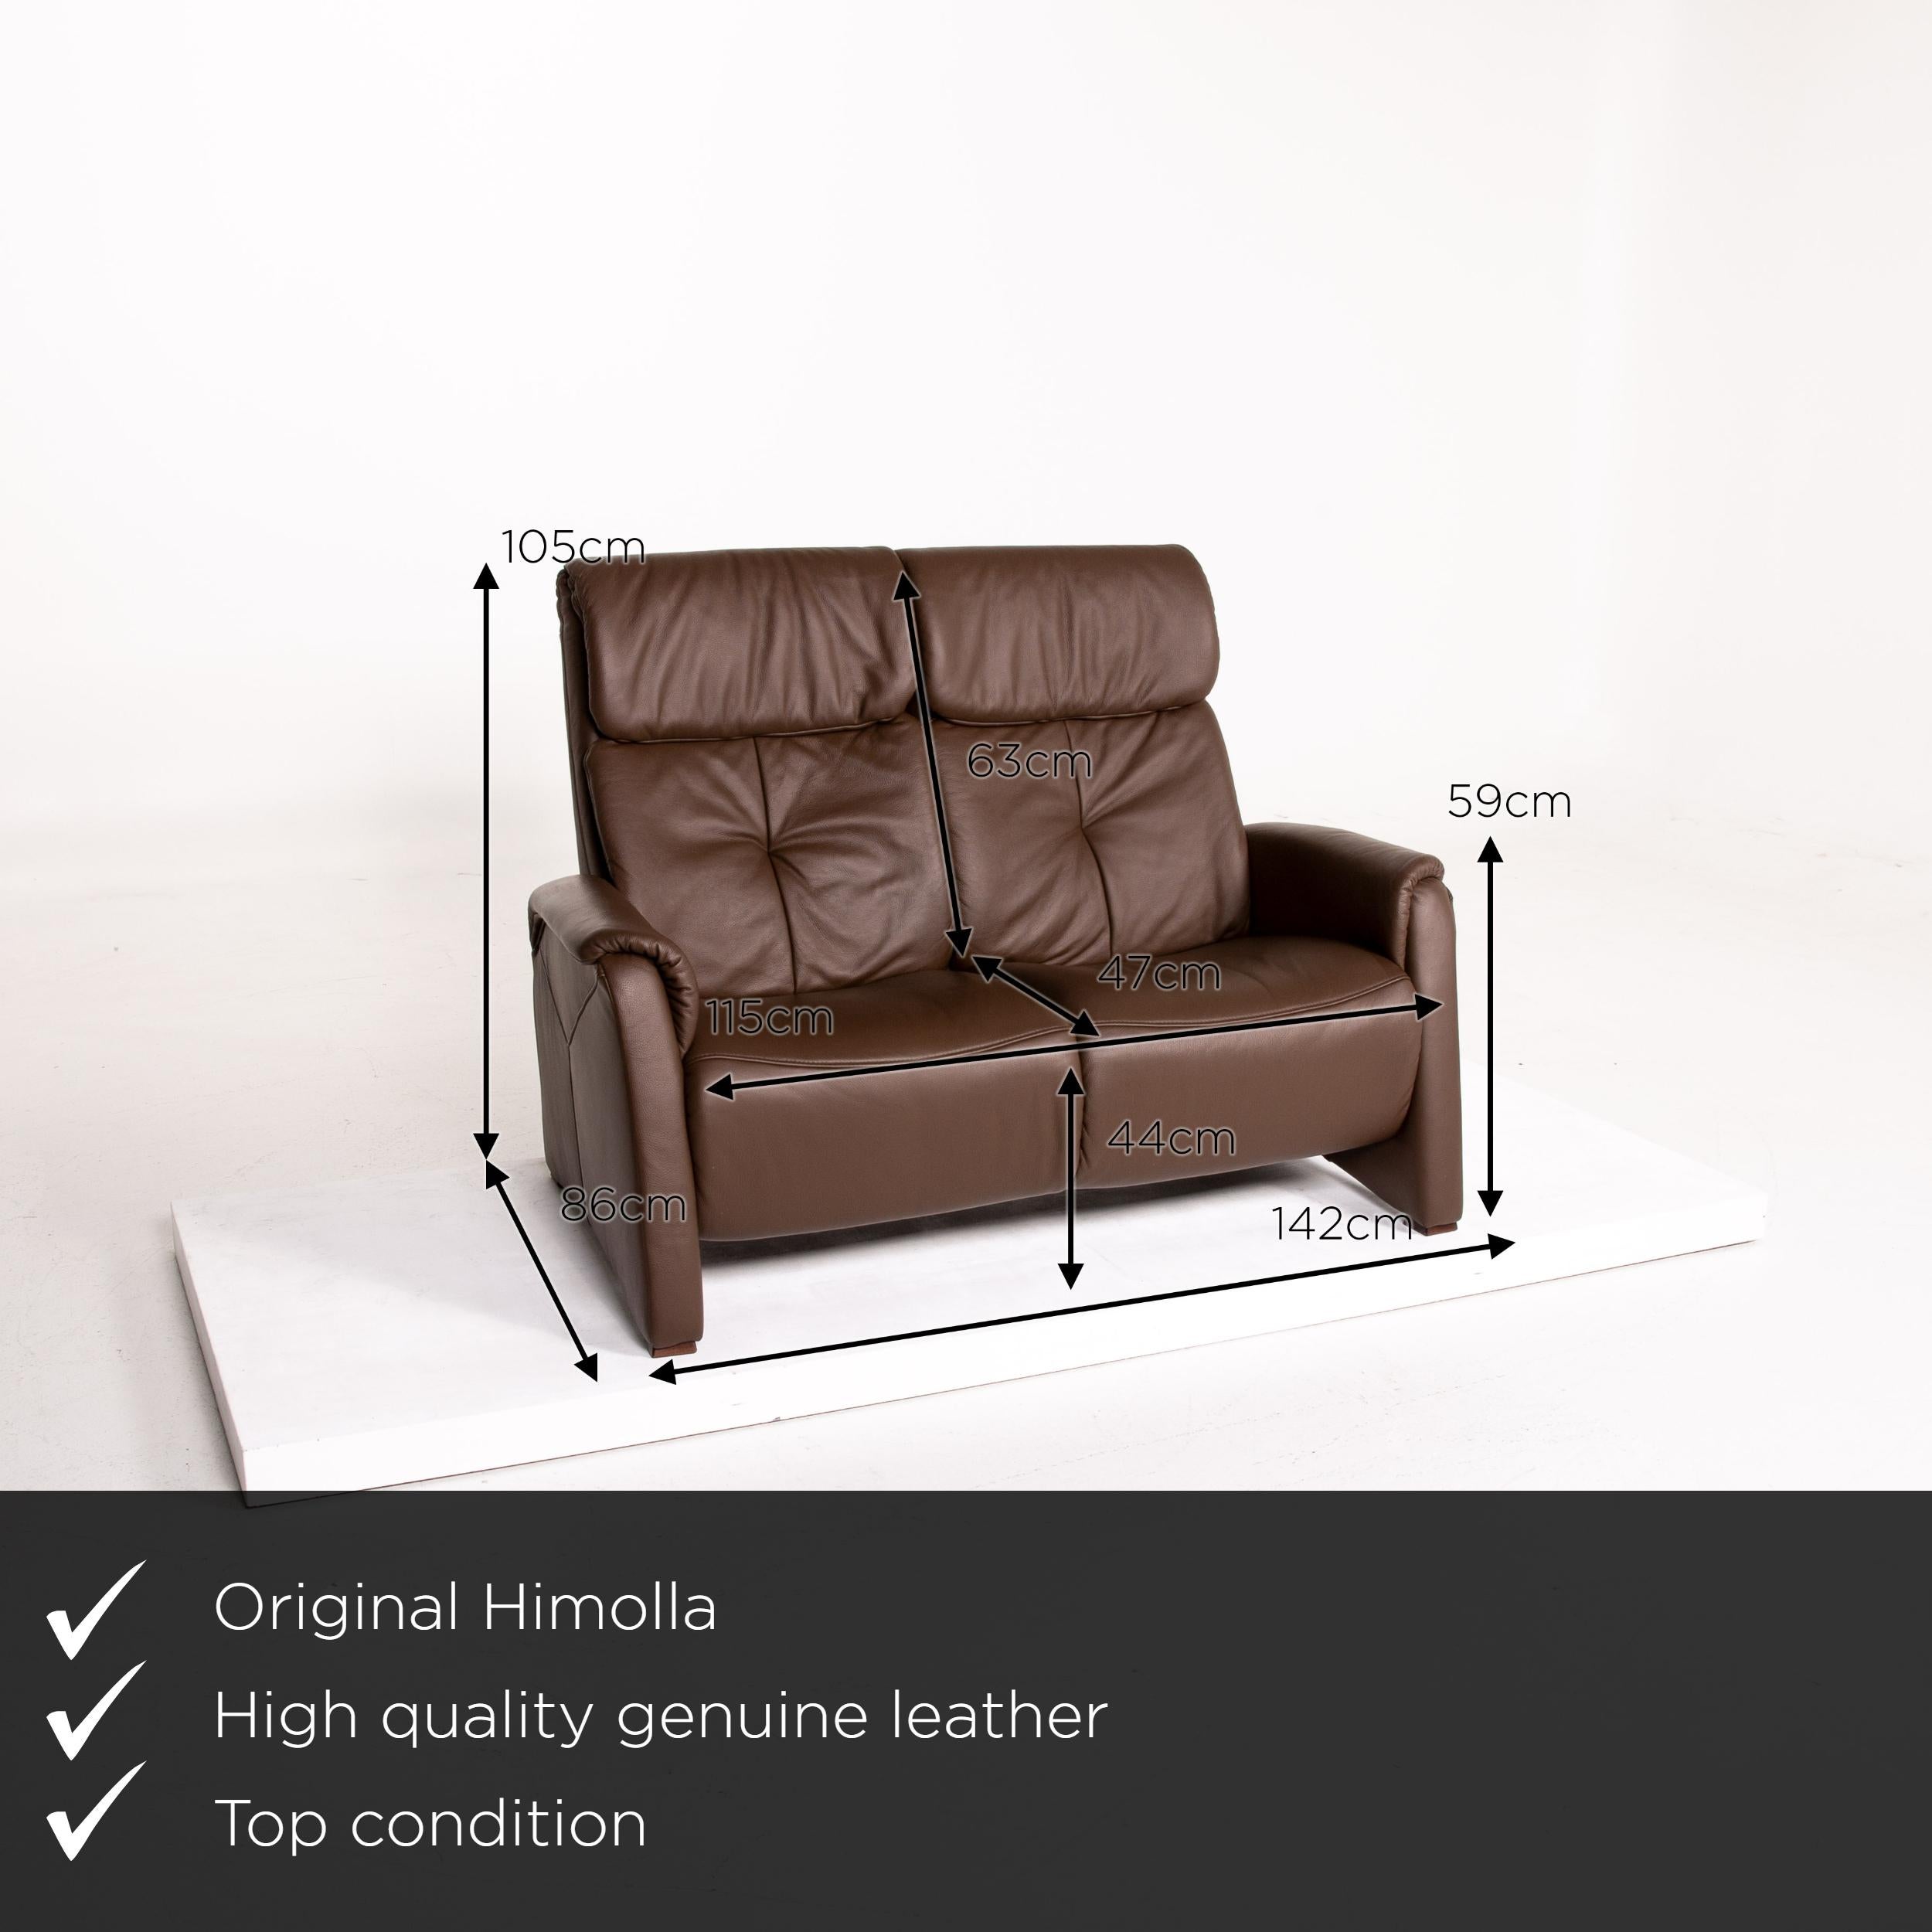 We present to you a Himolla leather sofa dark brown brown two-seat function relax function couch.
   
 

 Product measurements in centimeters:
 

Depth 86
Width 142
Height 105
Seat height 44
Rest height 59
Seat depth 47
Seat width